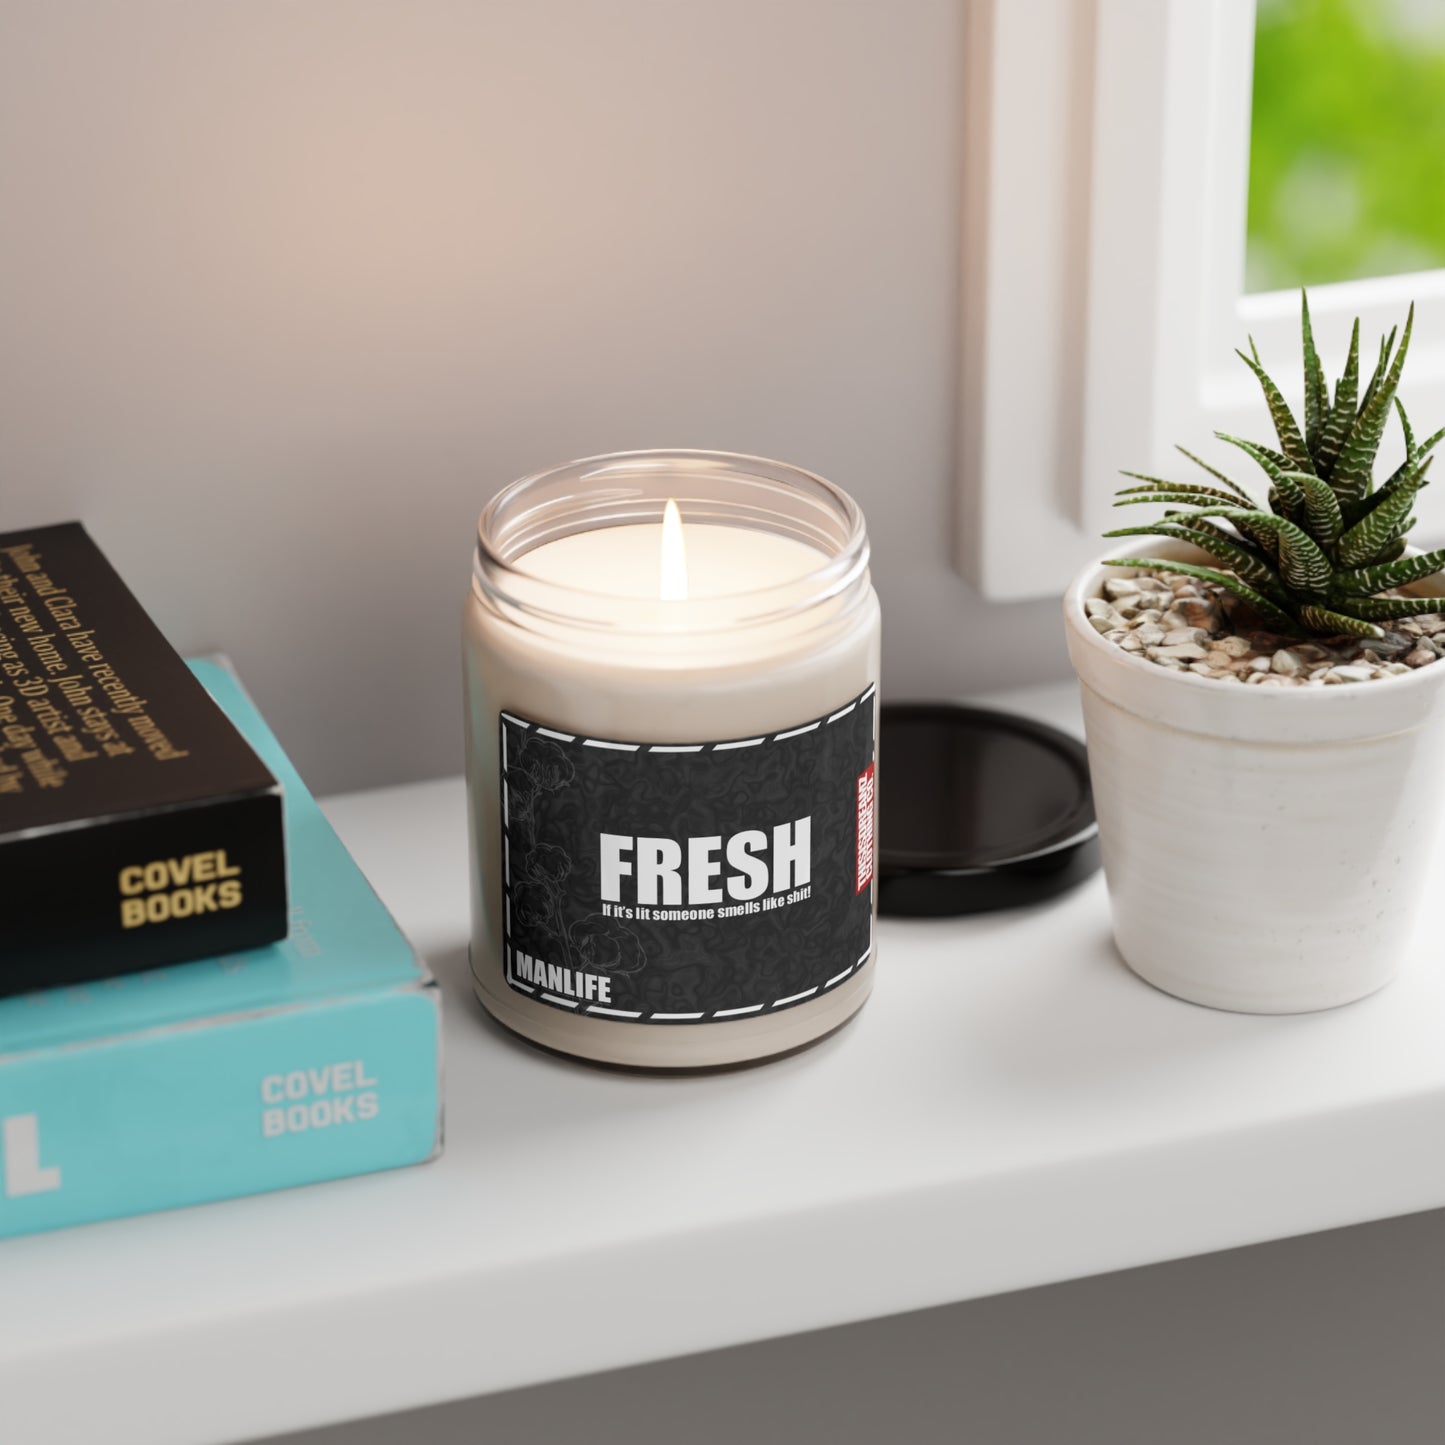 FRESH | Scented Soy Candle, 9oz